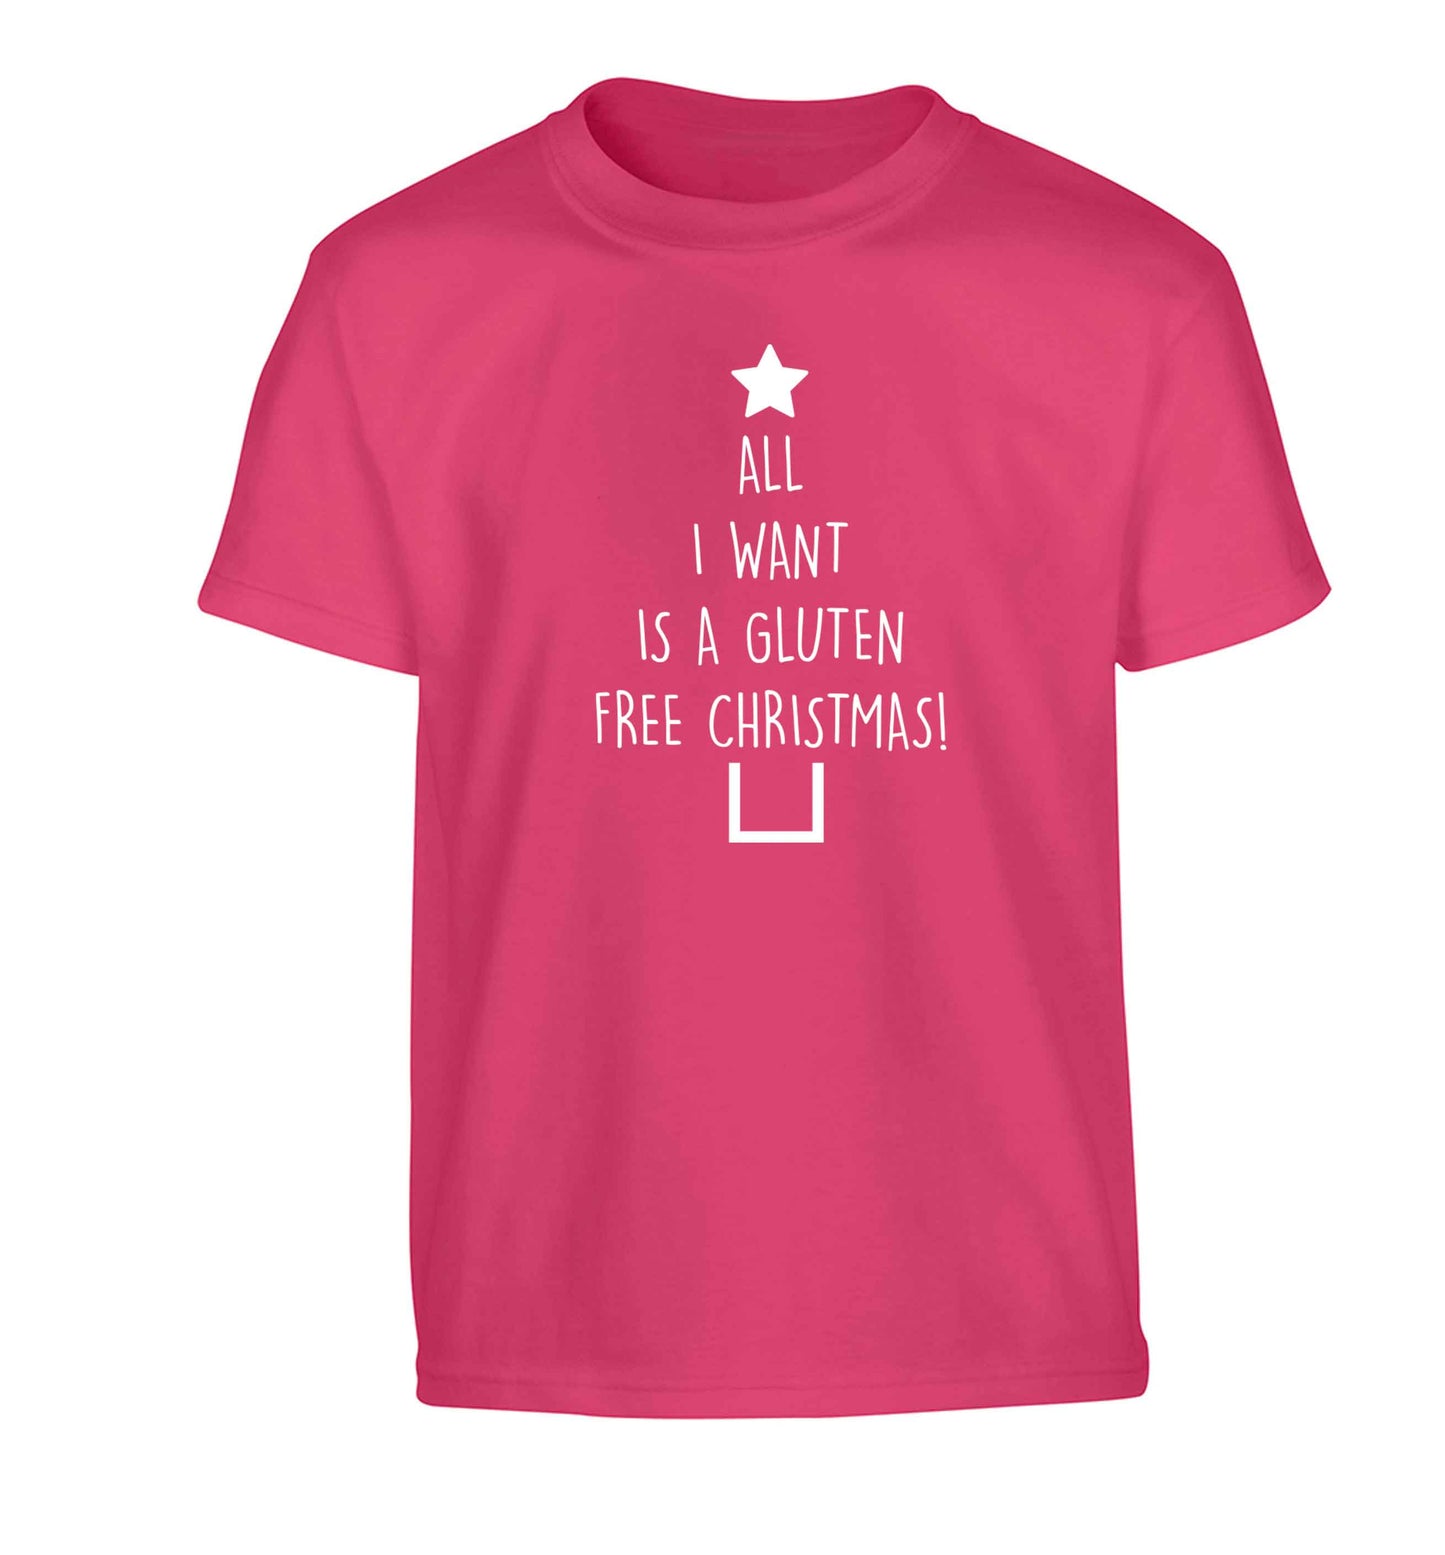 All I want is a gluten free Christmas Children's pink Tshirt 12-13 Years